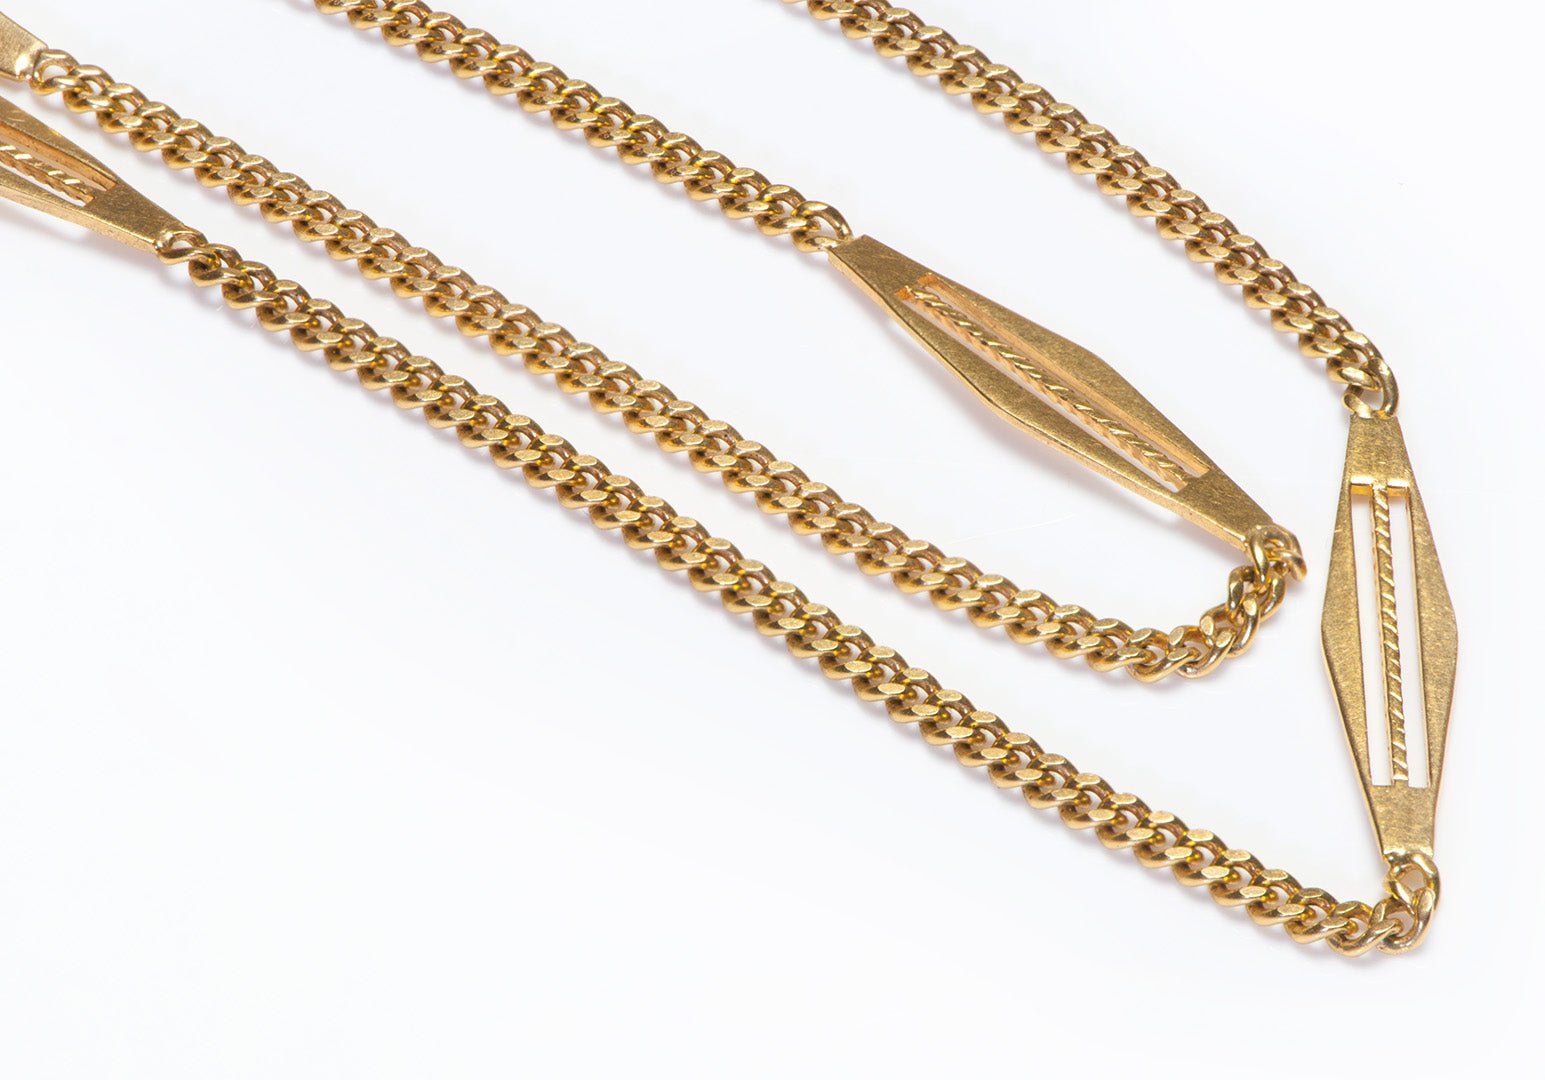 Vintage 18K Yellow Gold Chain Necklace